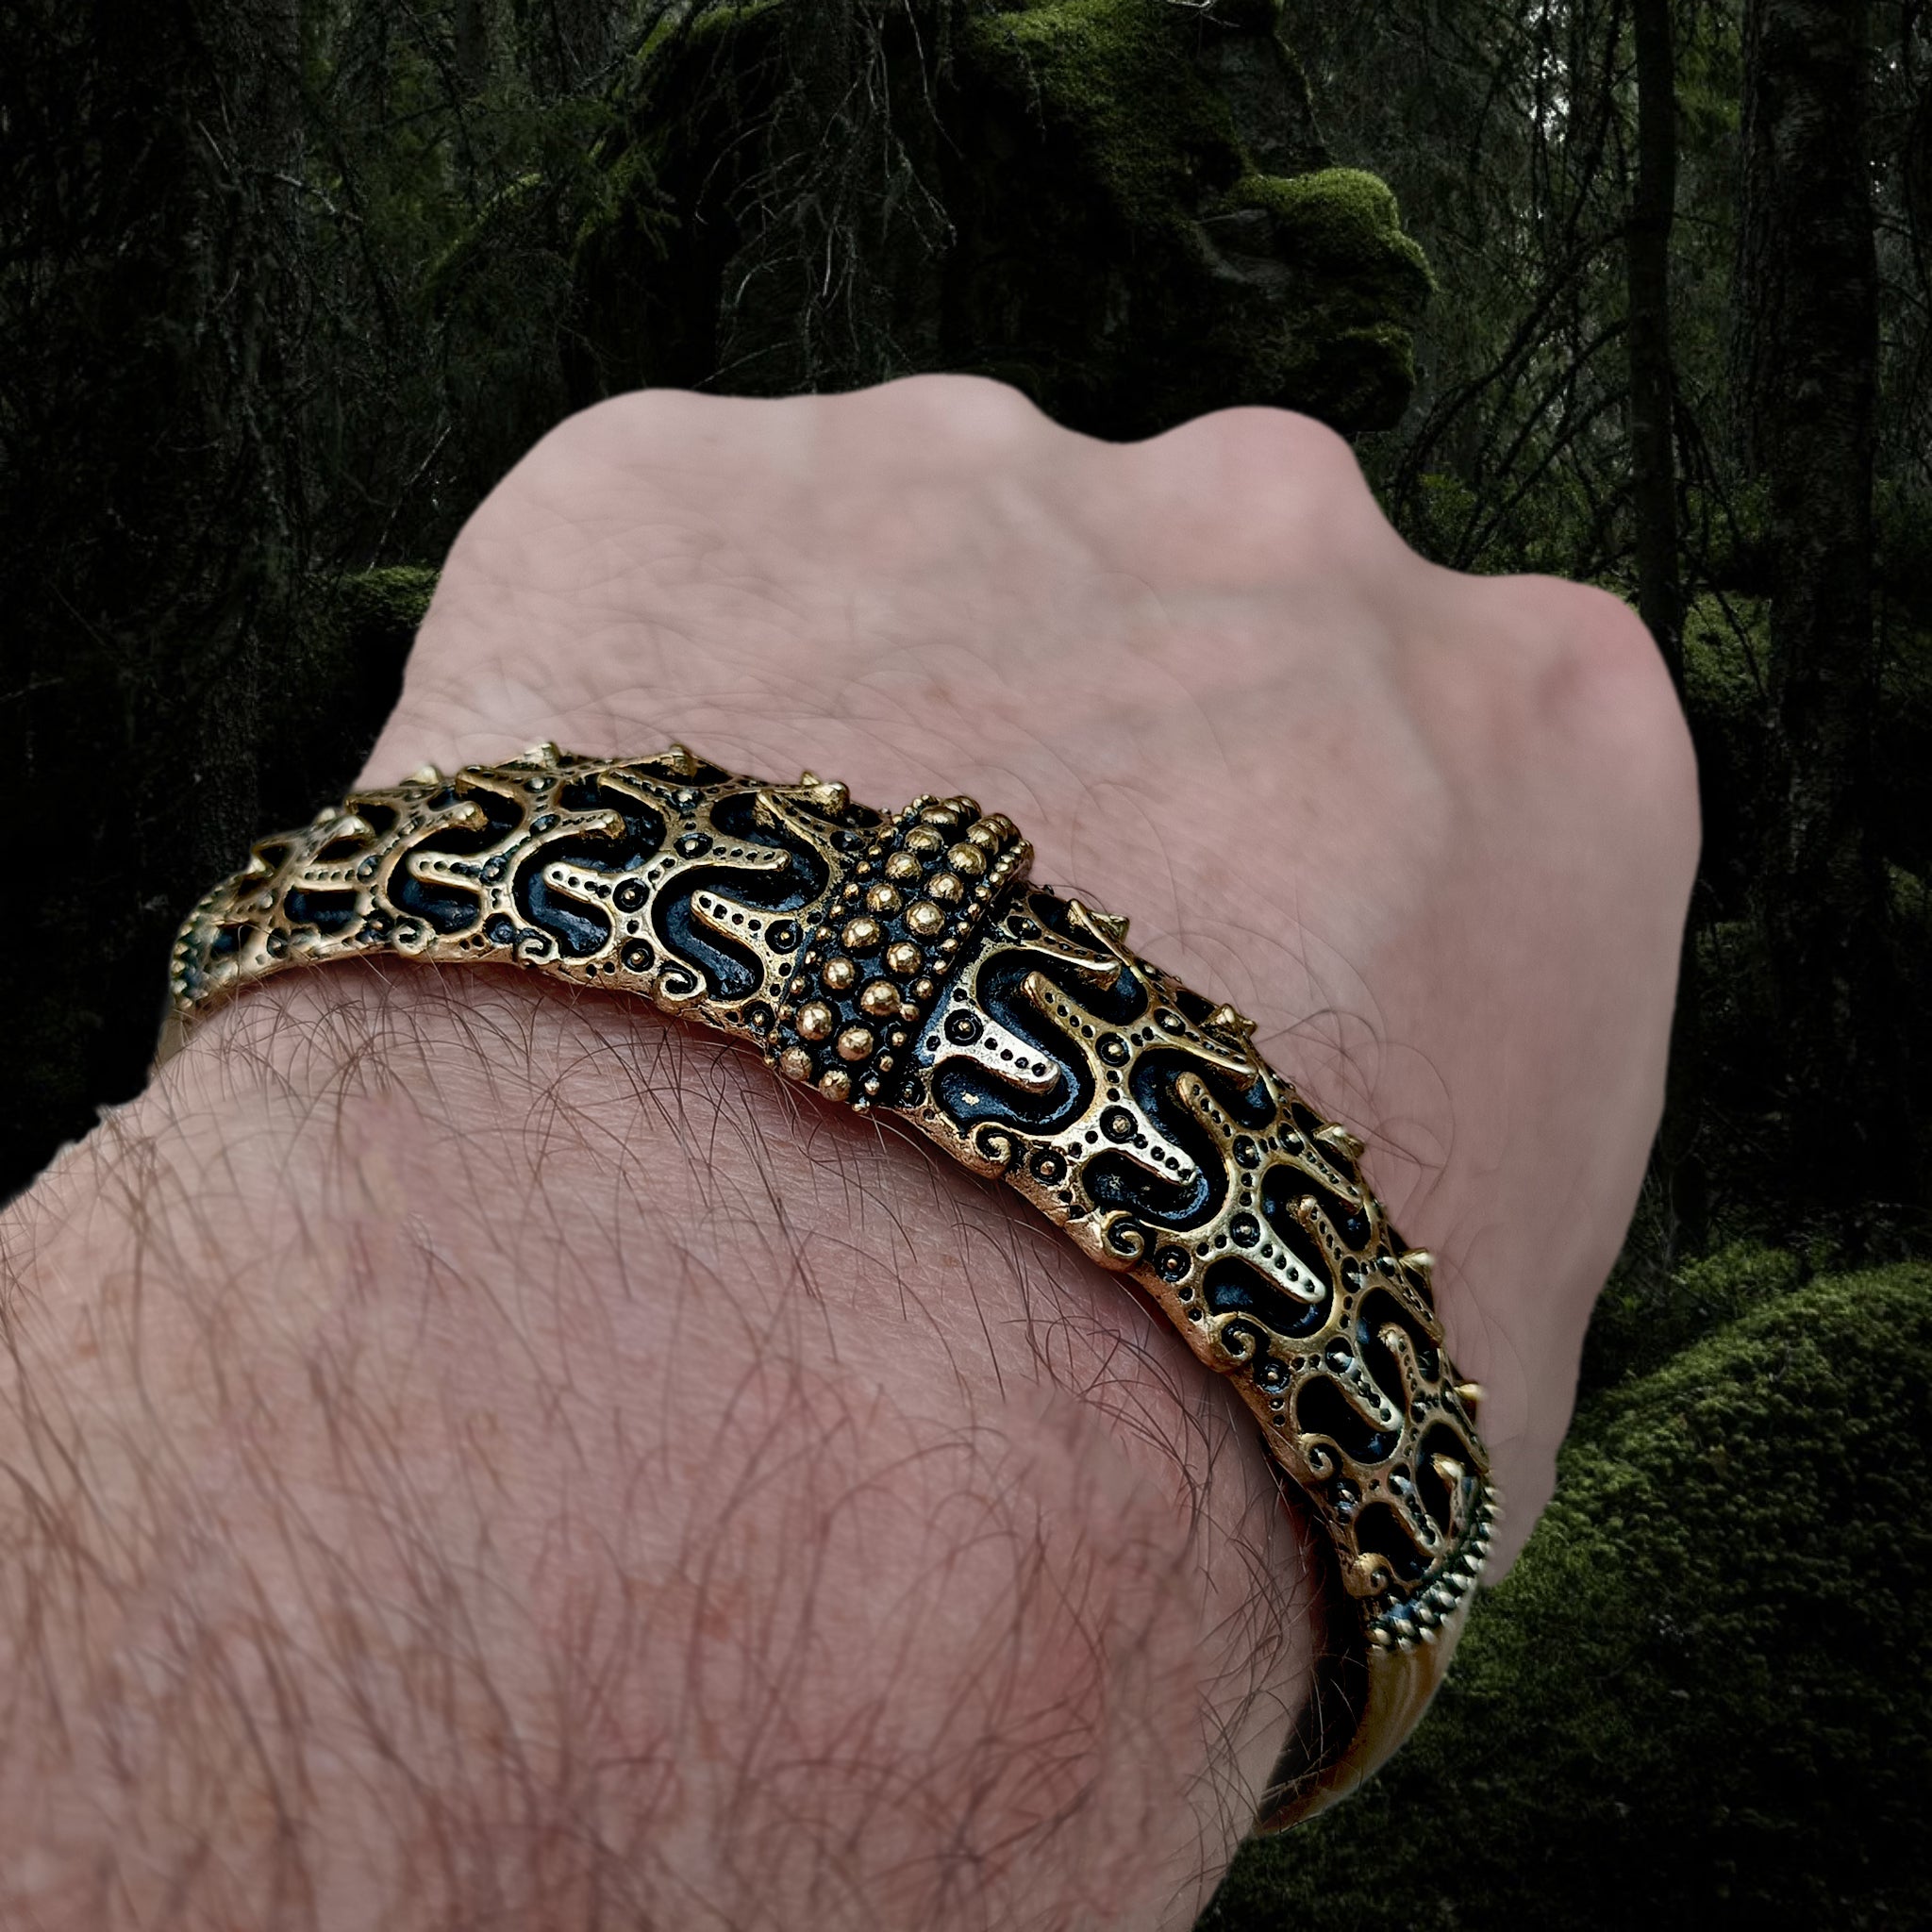 Bronze Replica Viking Bracelet / Arm Ring from Falster on Wrist - Anlge View